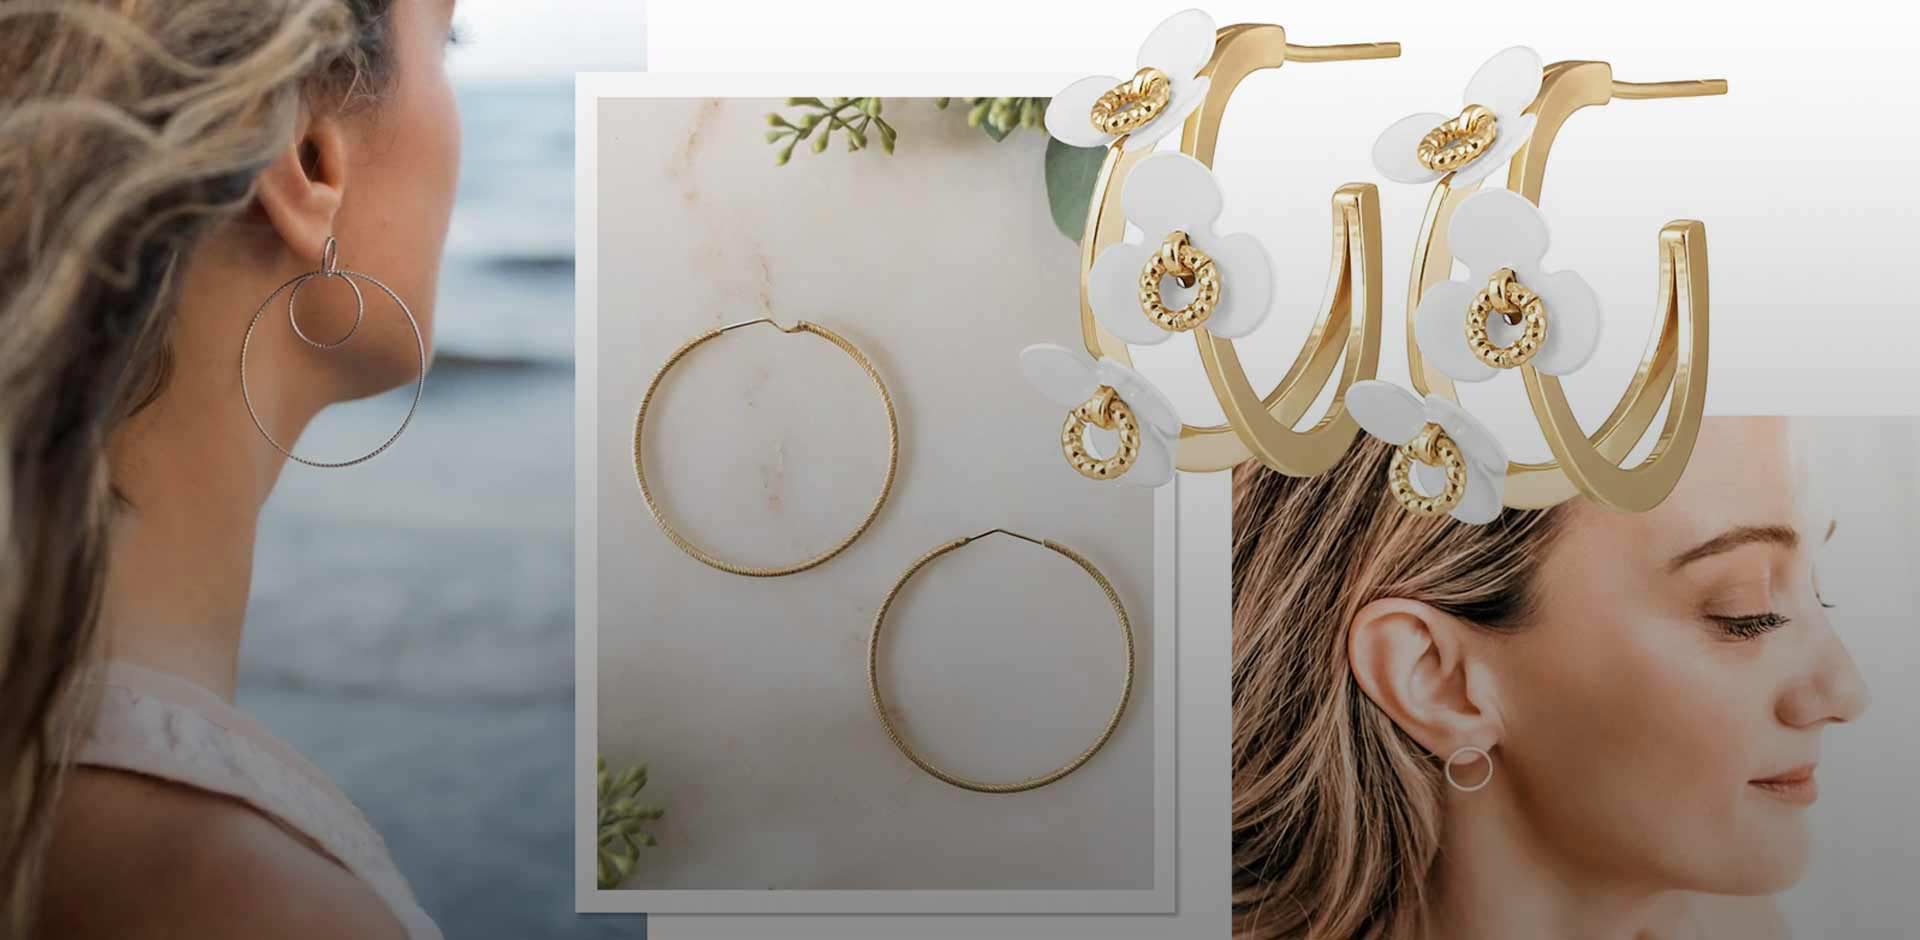 Professional jewelry photo editing and retouching of 50,000 images enhances online market presence for USA-based jewelry brand Banner